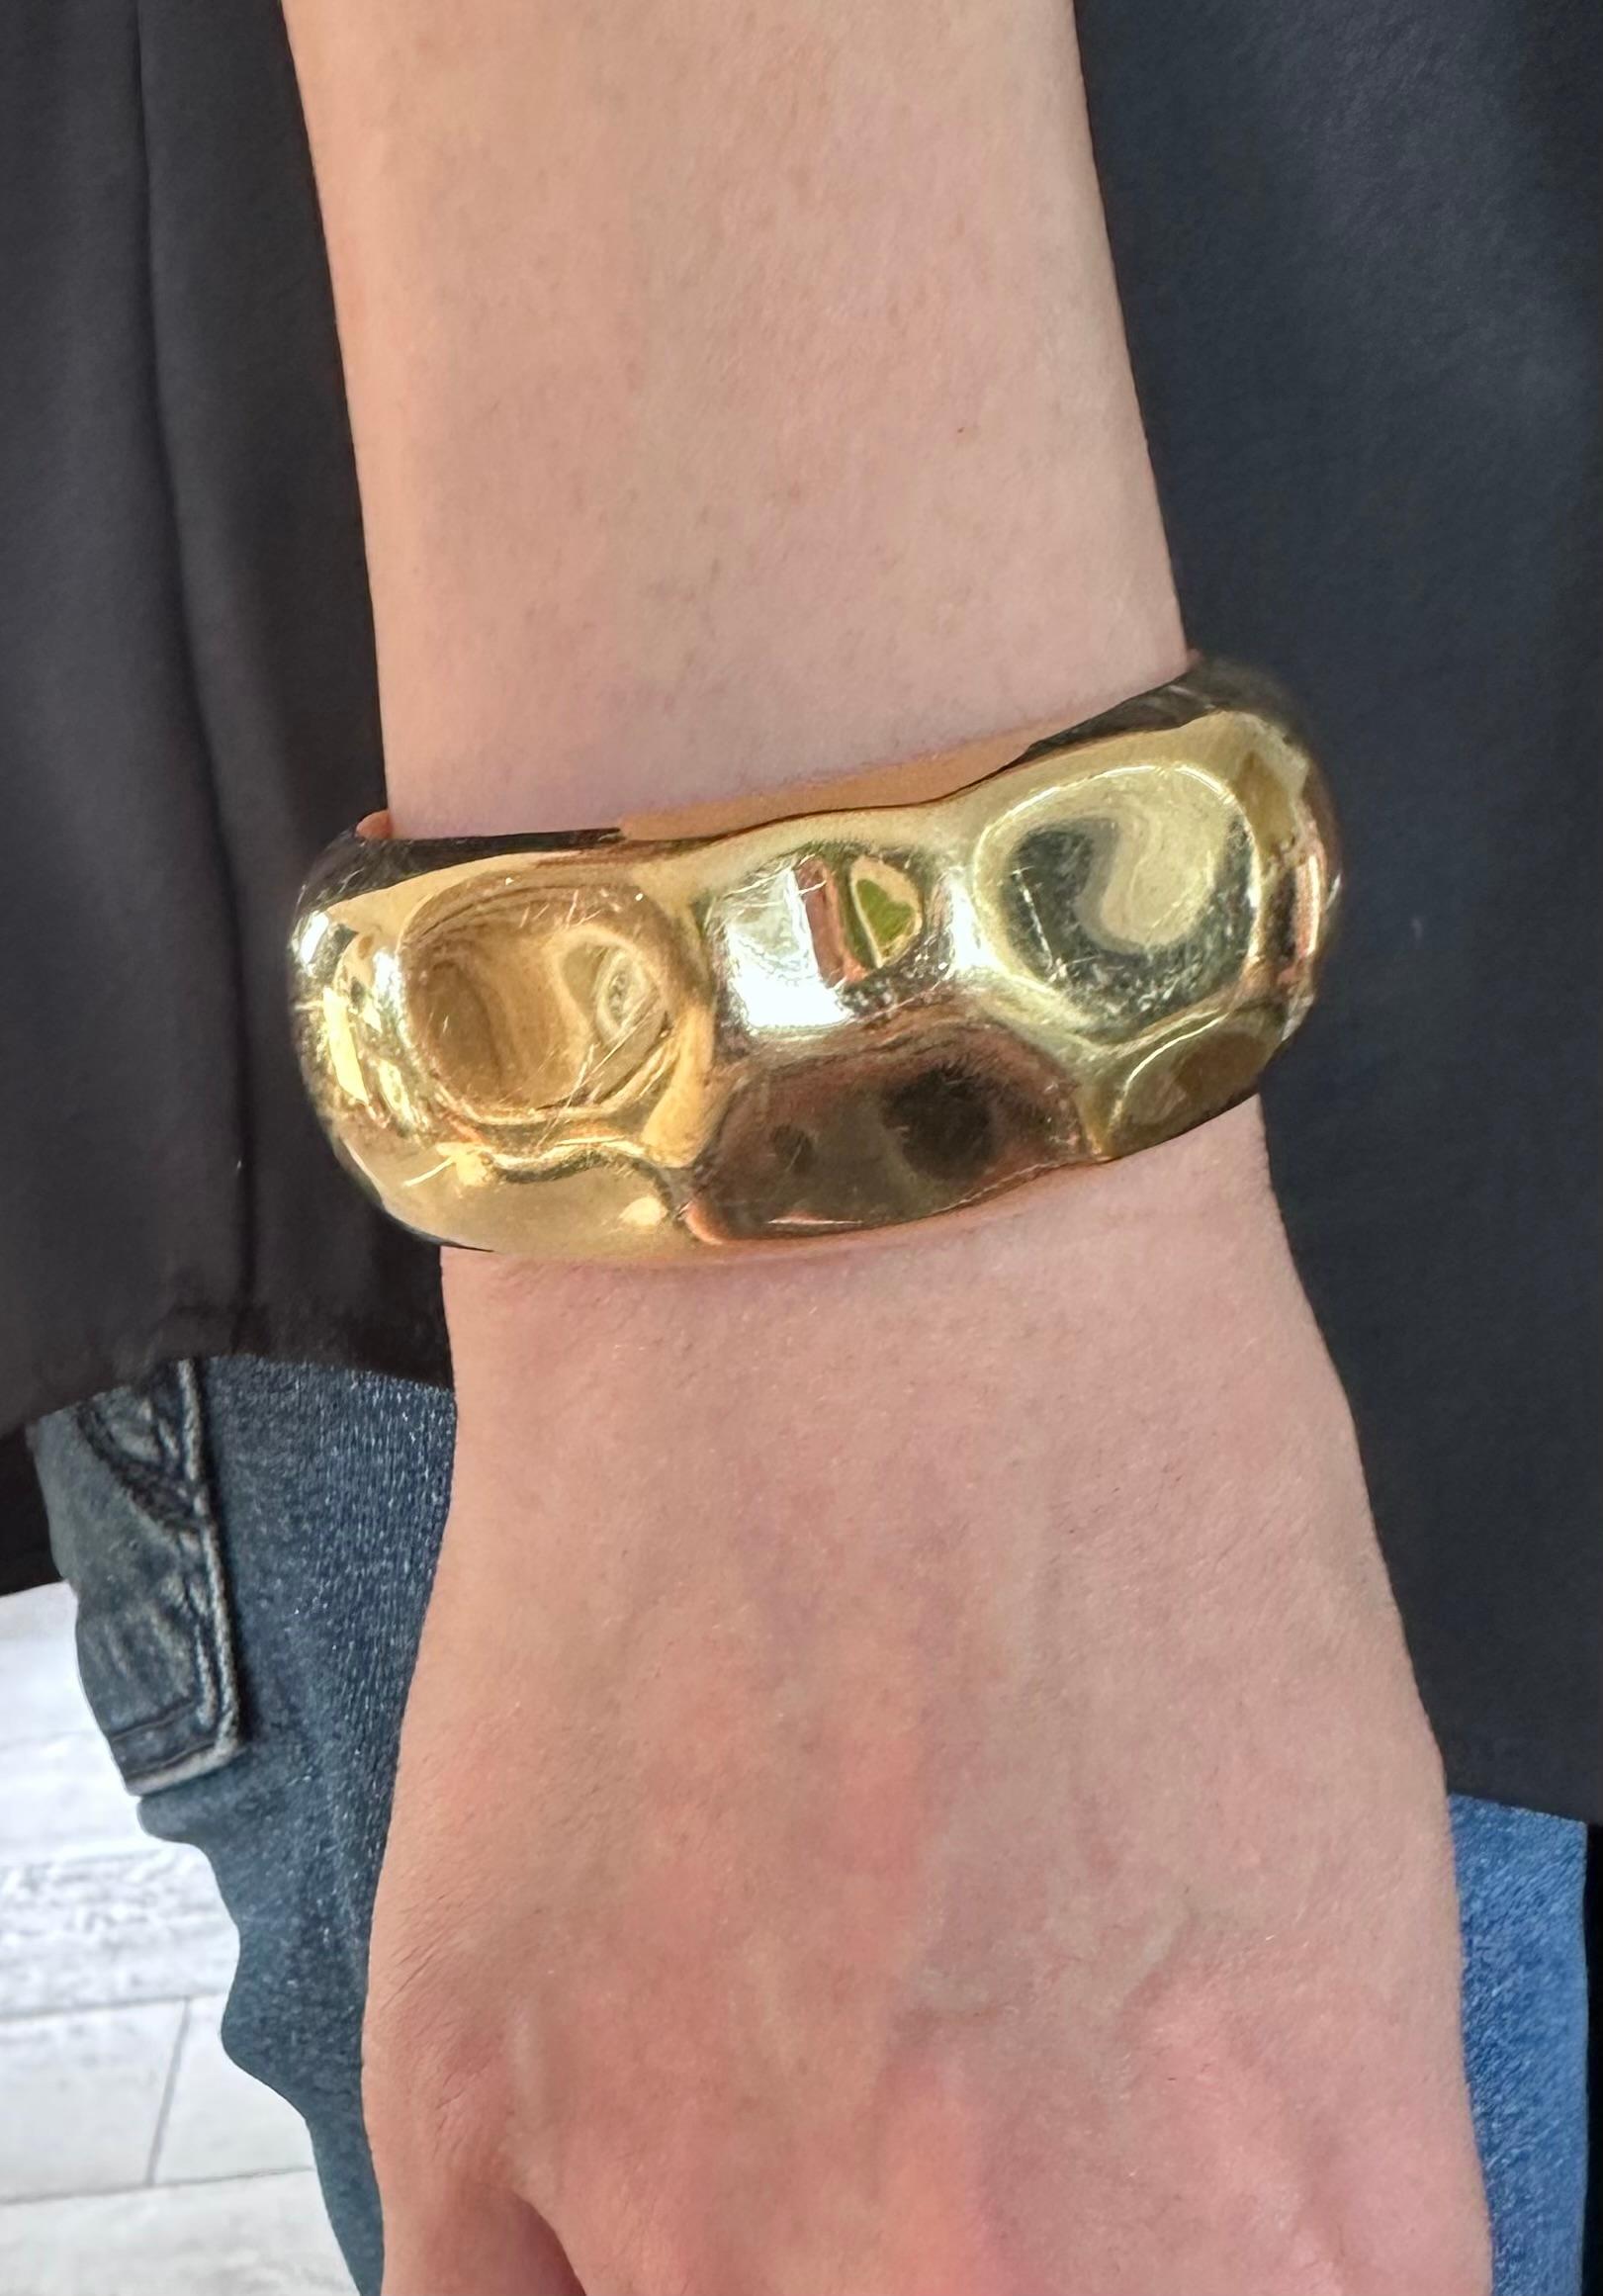 The Tiffany & Co Faceted Cuff Bracelet
This is the Narrow Version. 
Small
5.25 up to 5.75 diameter wrist.
Width: 1.25 Inches 
weight 62 g
18k Yellow Gold 
Retail 16,500

about 
Elsa Peretti, a true pioneer of design, translates all she sees in the